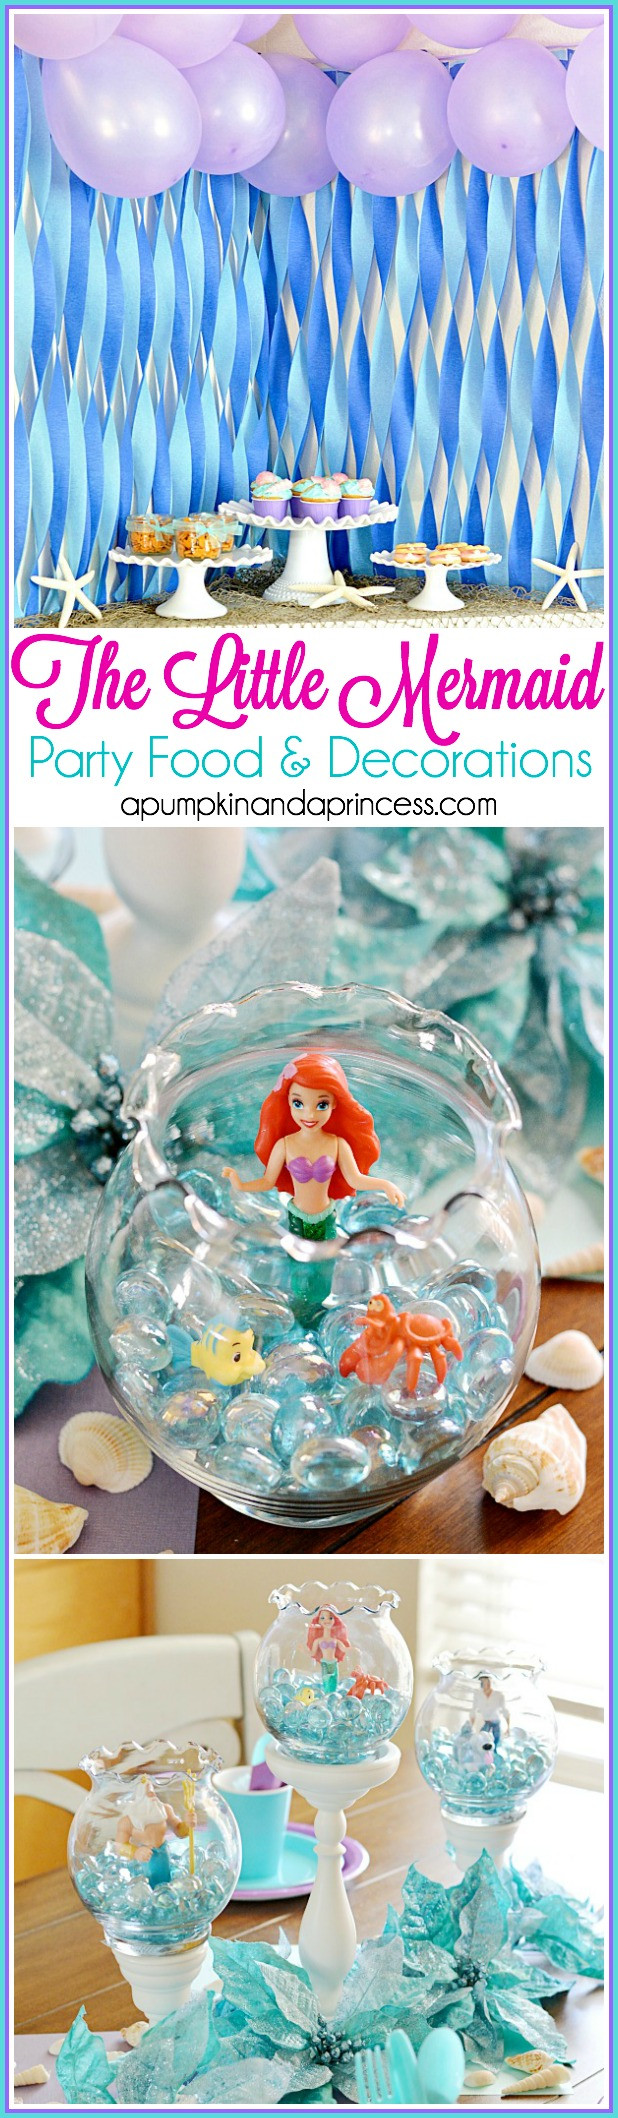 The Little Mermaid Party Food Ideas
 The Little Mermaid Party A Pumpkin And A Princess